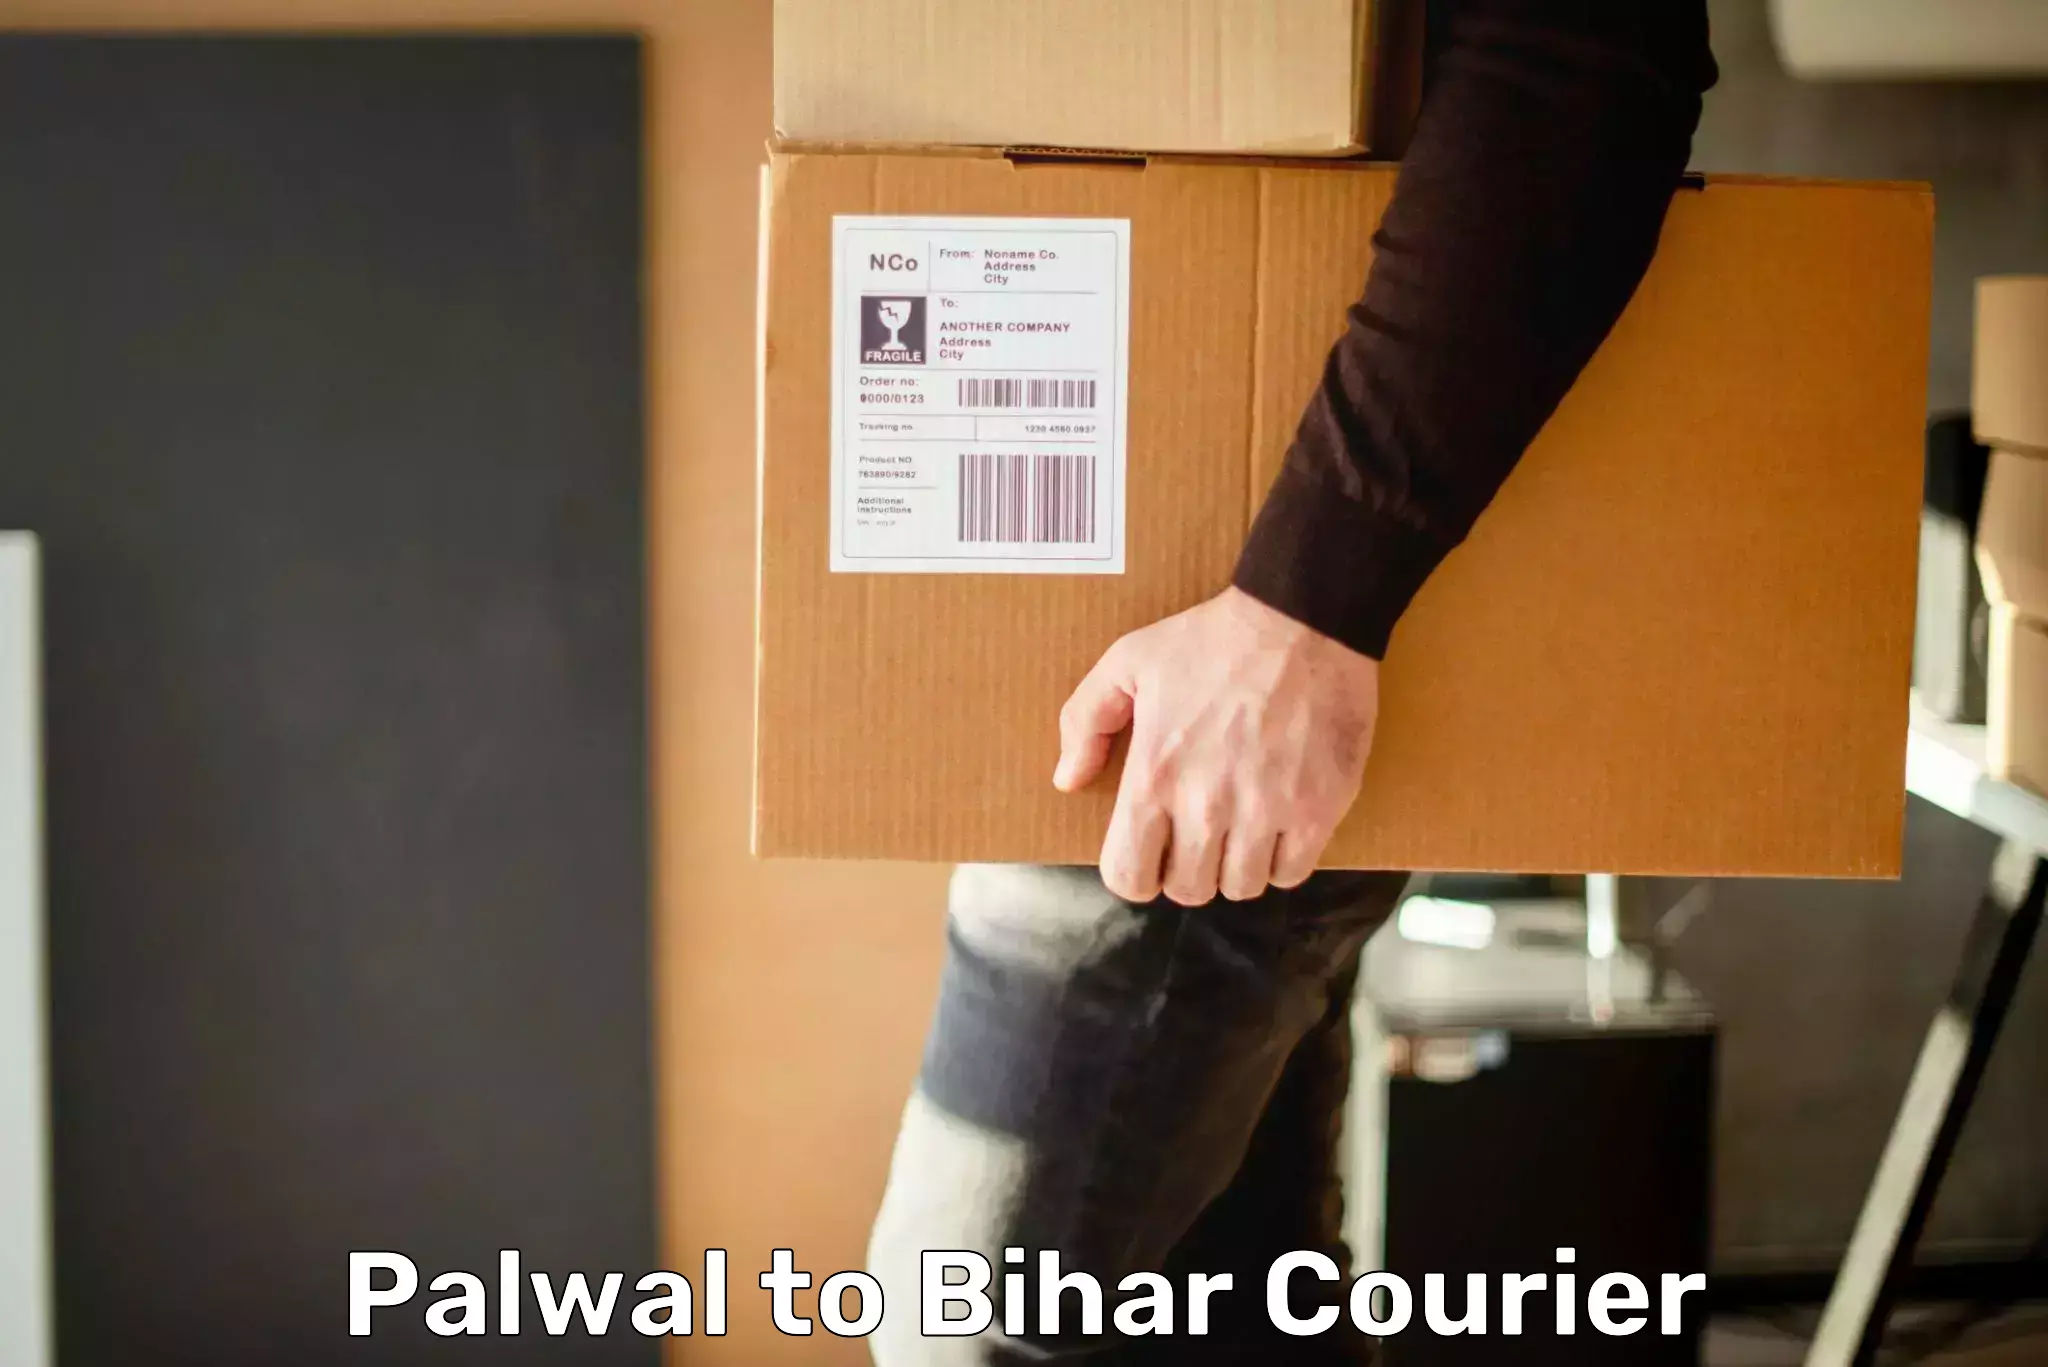 Courier service innovation Palwal to Samastipur